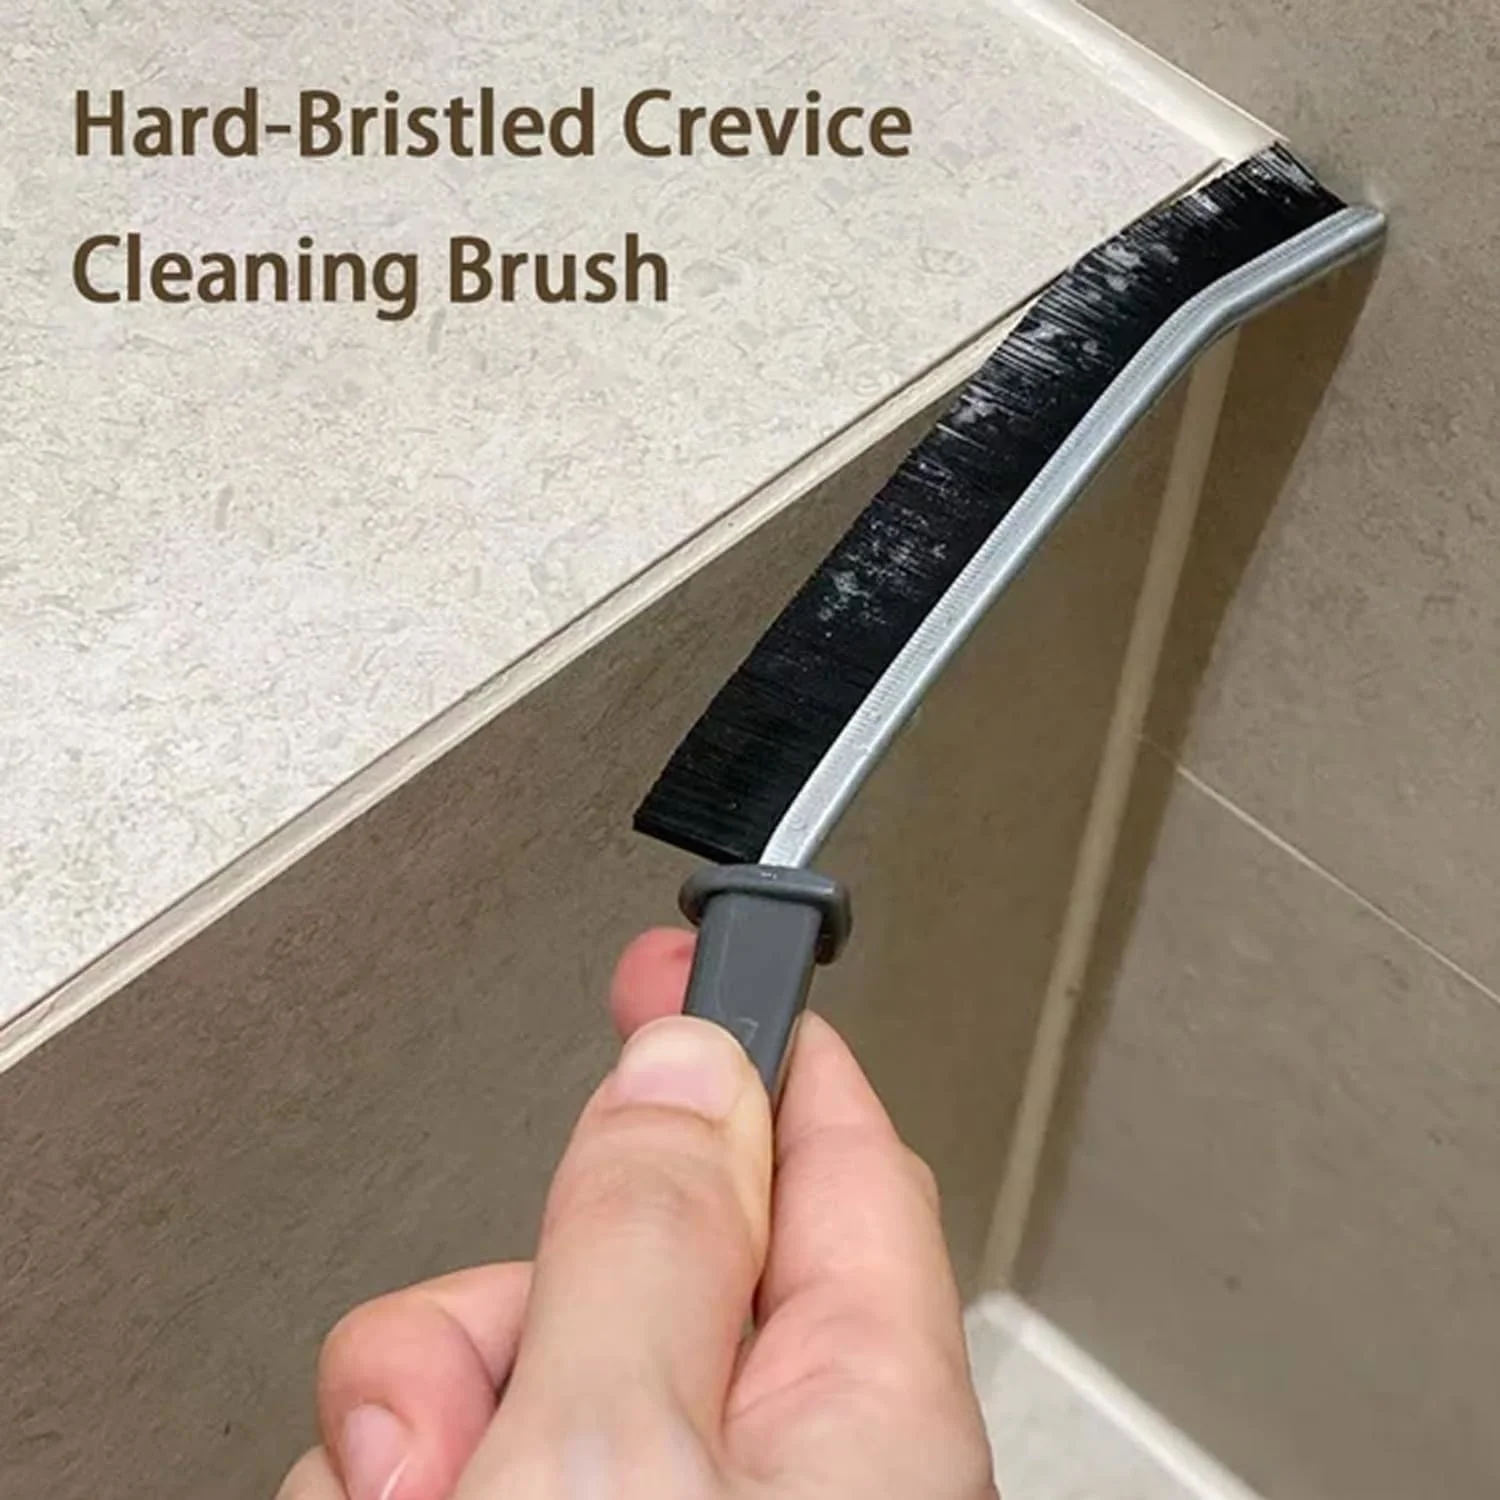 Hard-Bristled Crevice Cleaning Brush Grout Cleaner Scrub Brush Deep Tile Joints Crevice Gap Cleaning Brush Tool Cleaning Tools images - 6